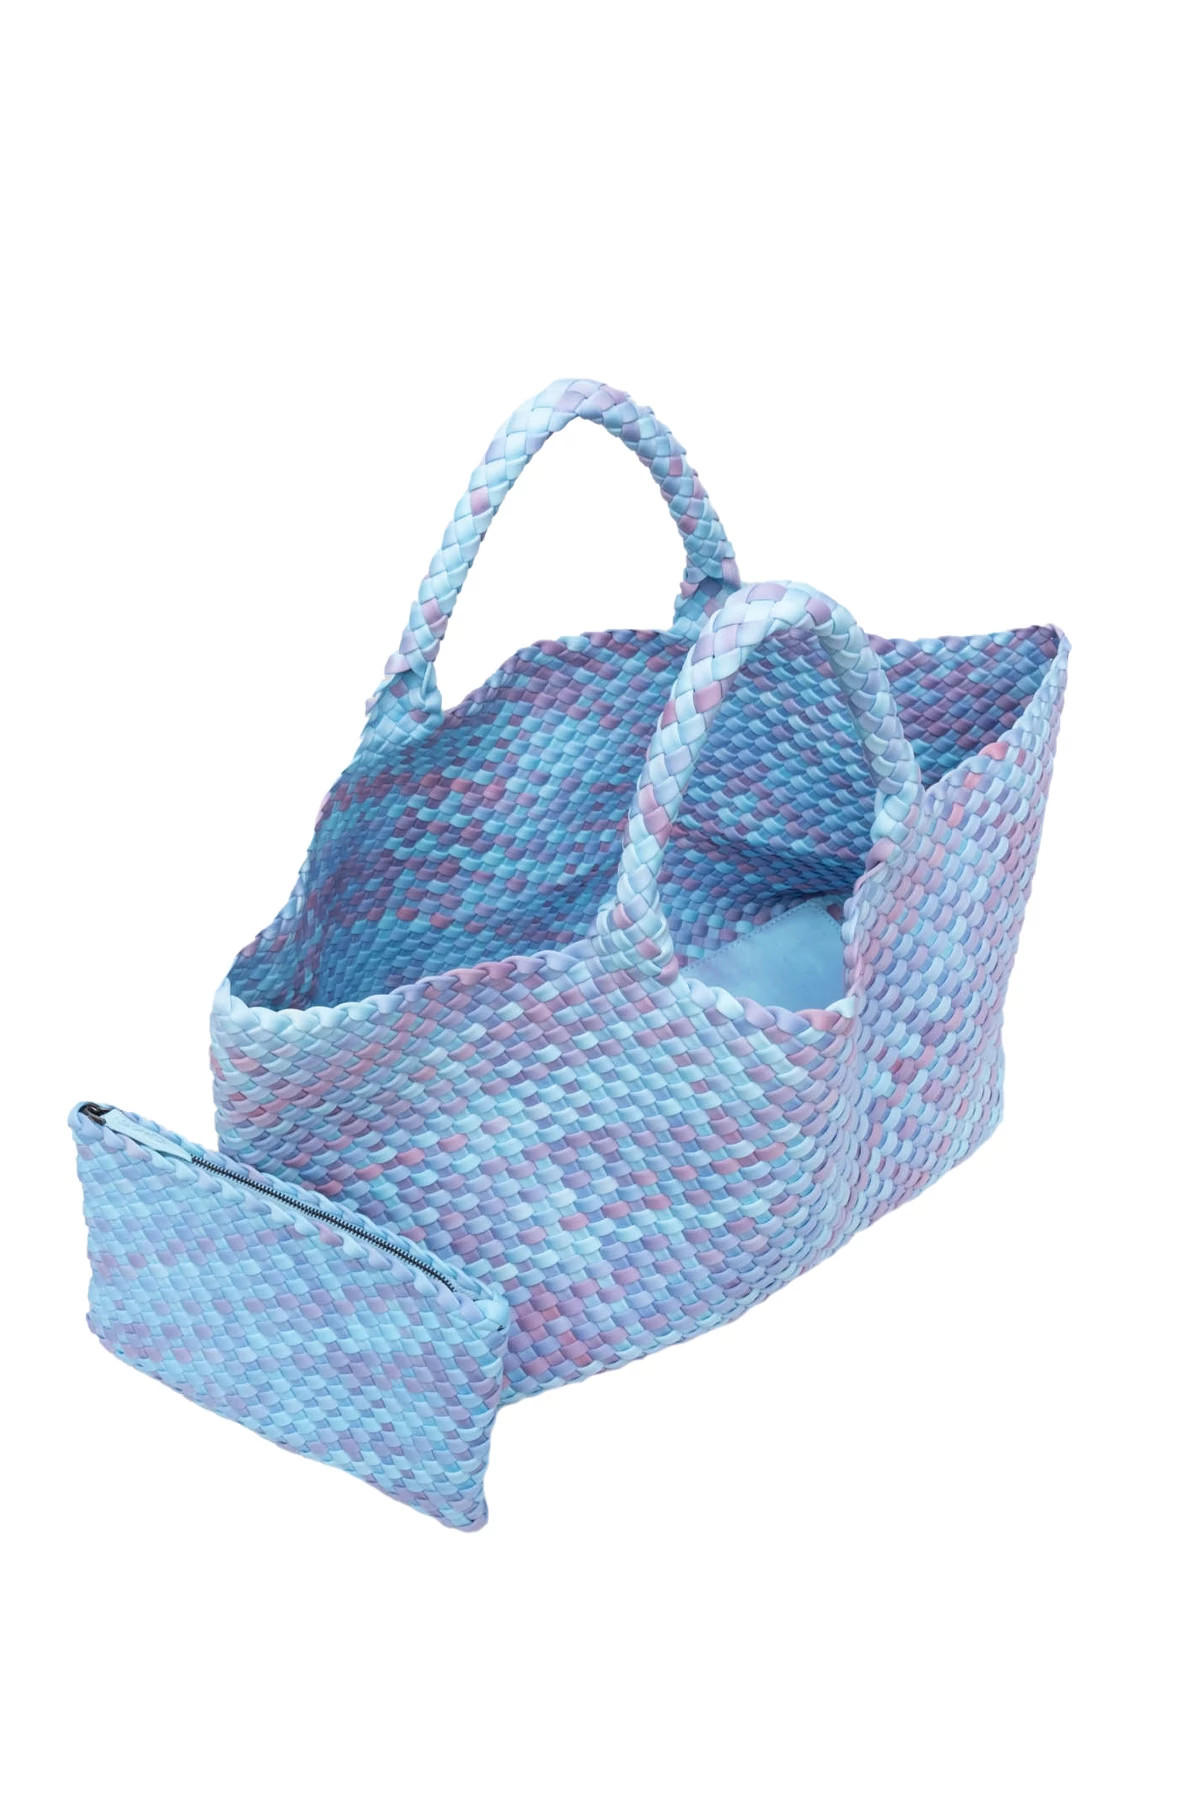 BEACH BABY St. Barths Large Tie-Dye Tote image number 2